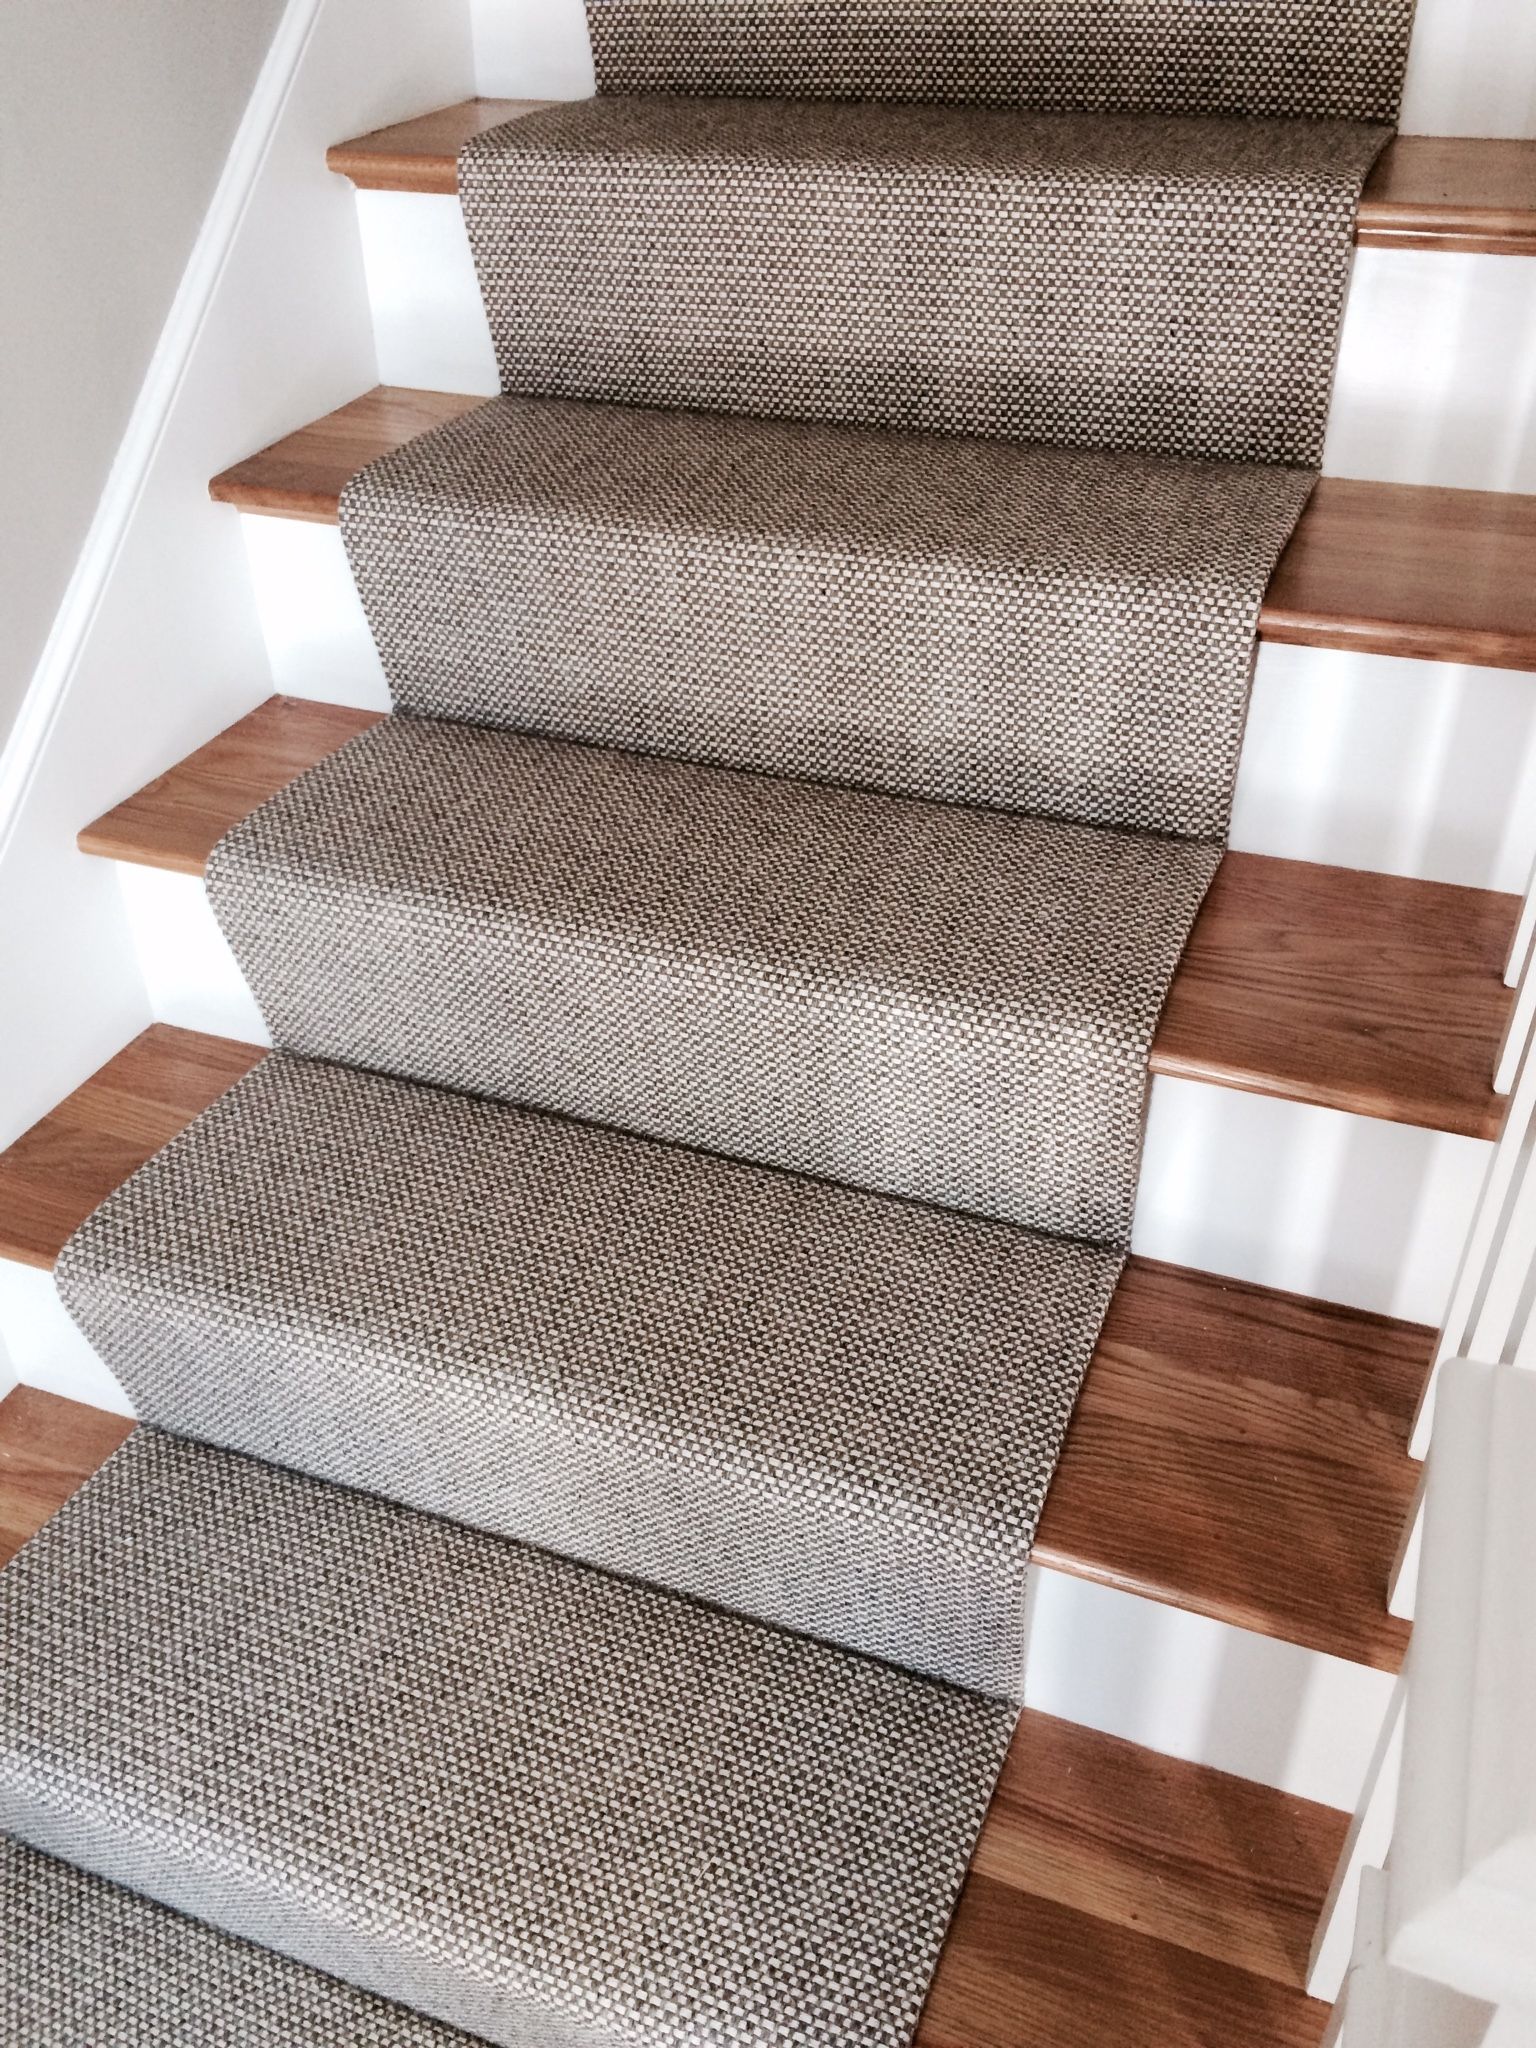 Merida Flat Woven Wool Stair Runner The Carpet Workroom The Regarding Carpets Runners For Stairs (View 6 of 20)